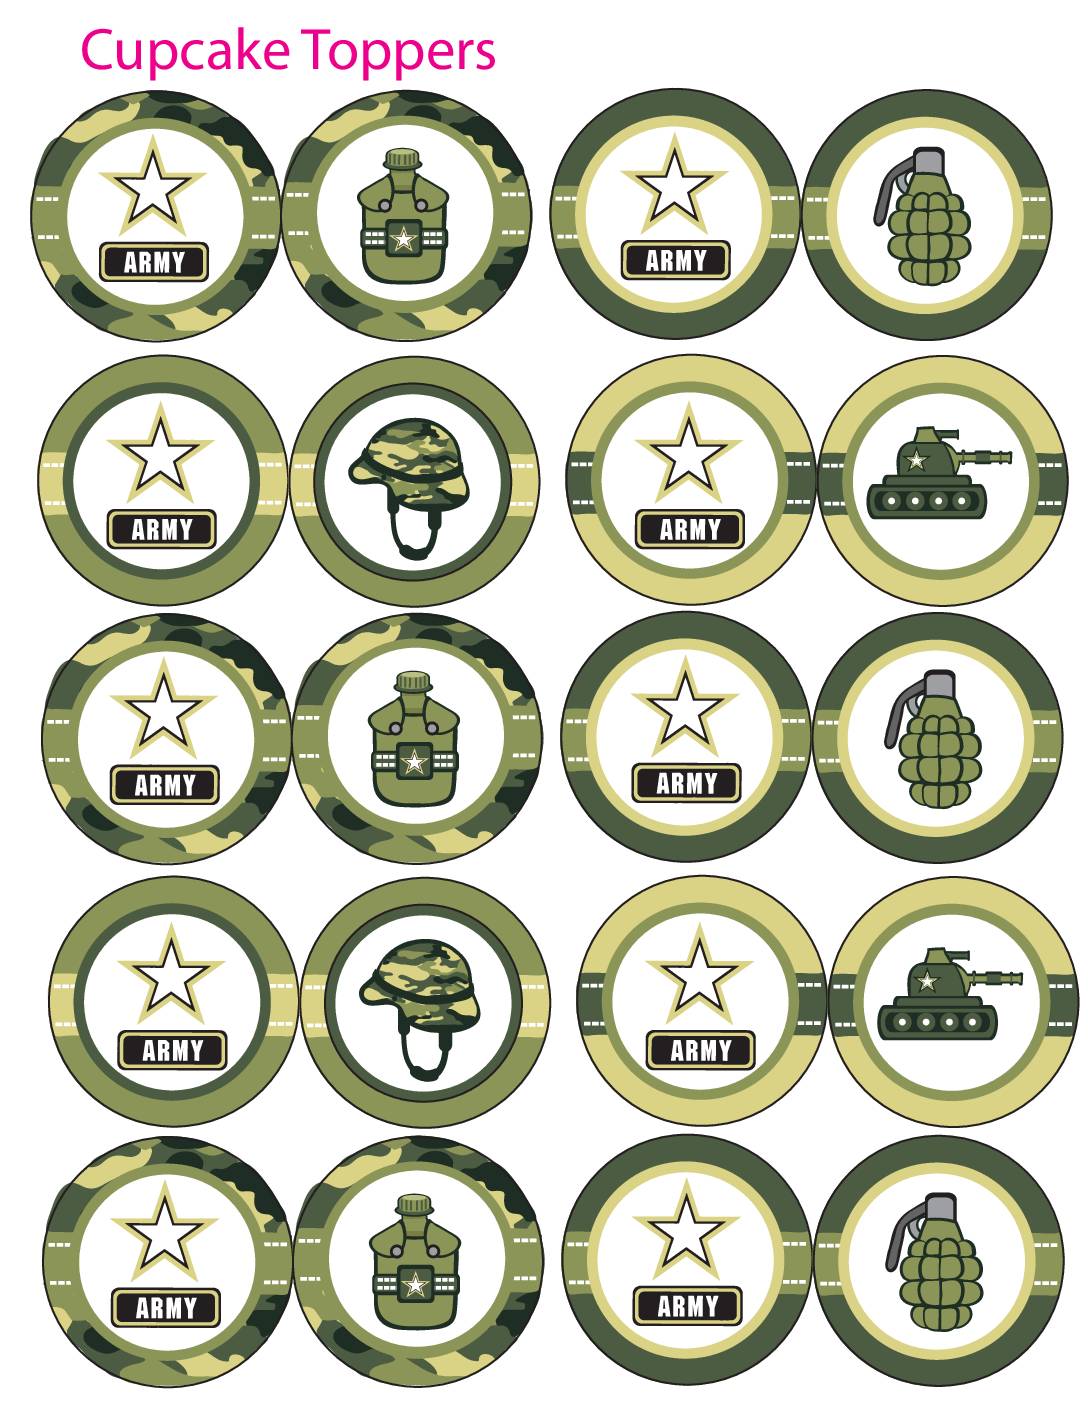 Cupcake Toppers army Cupcake Wrappers